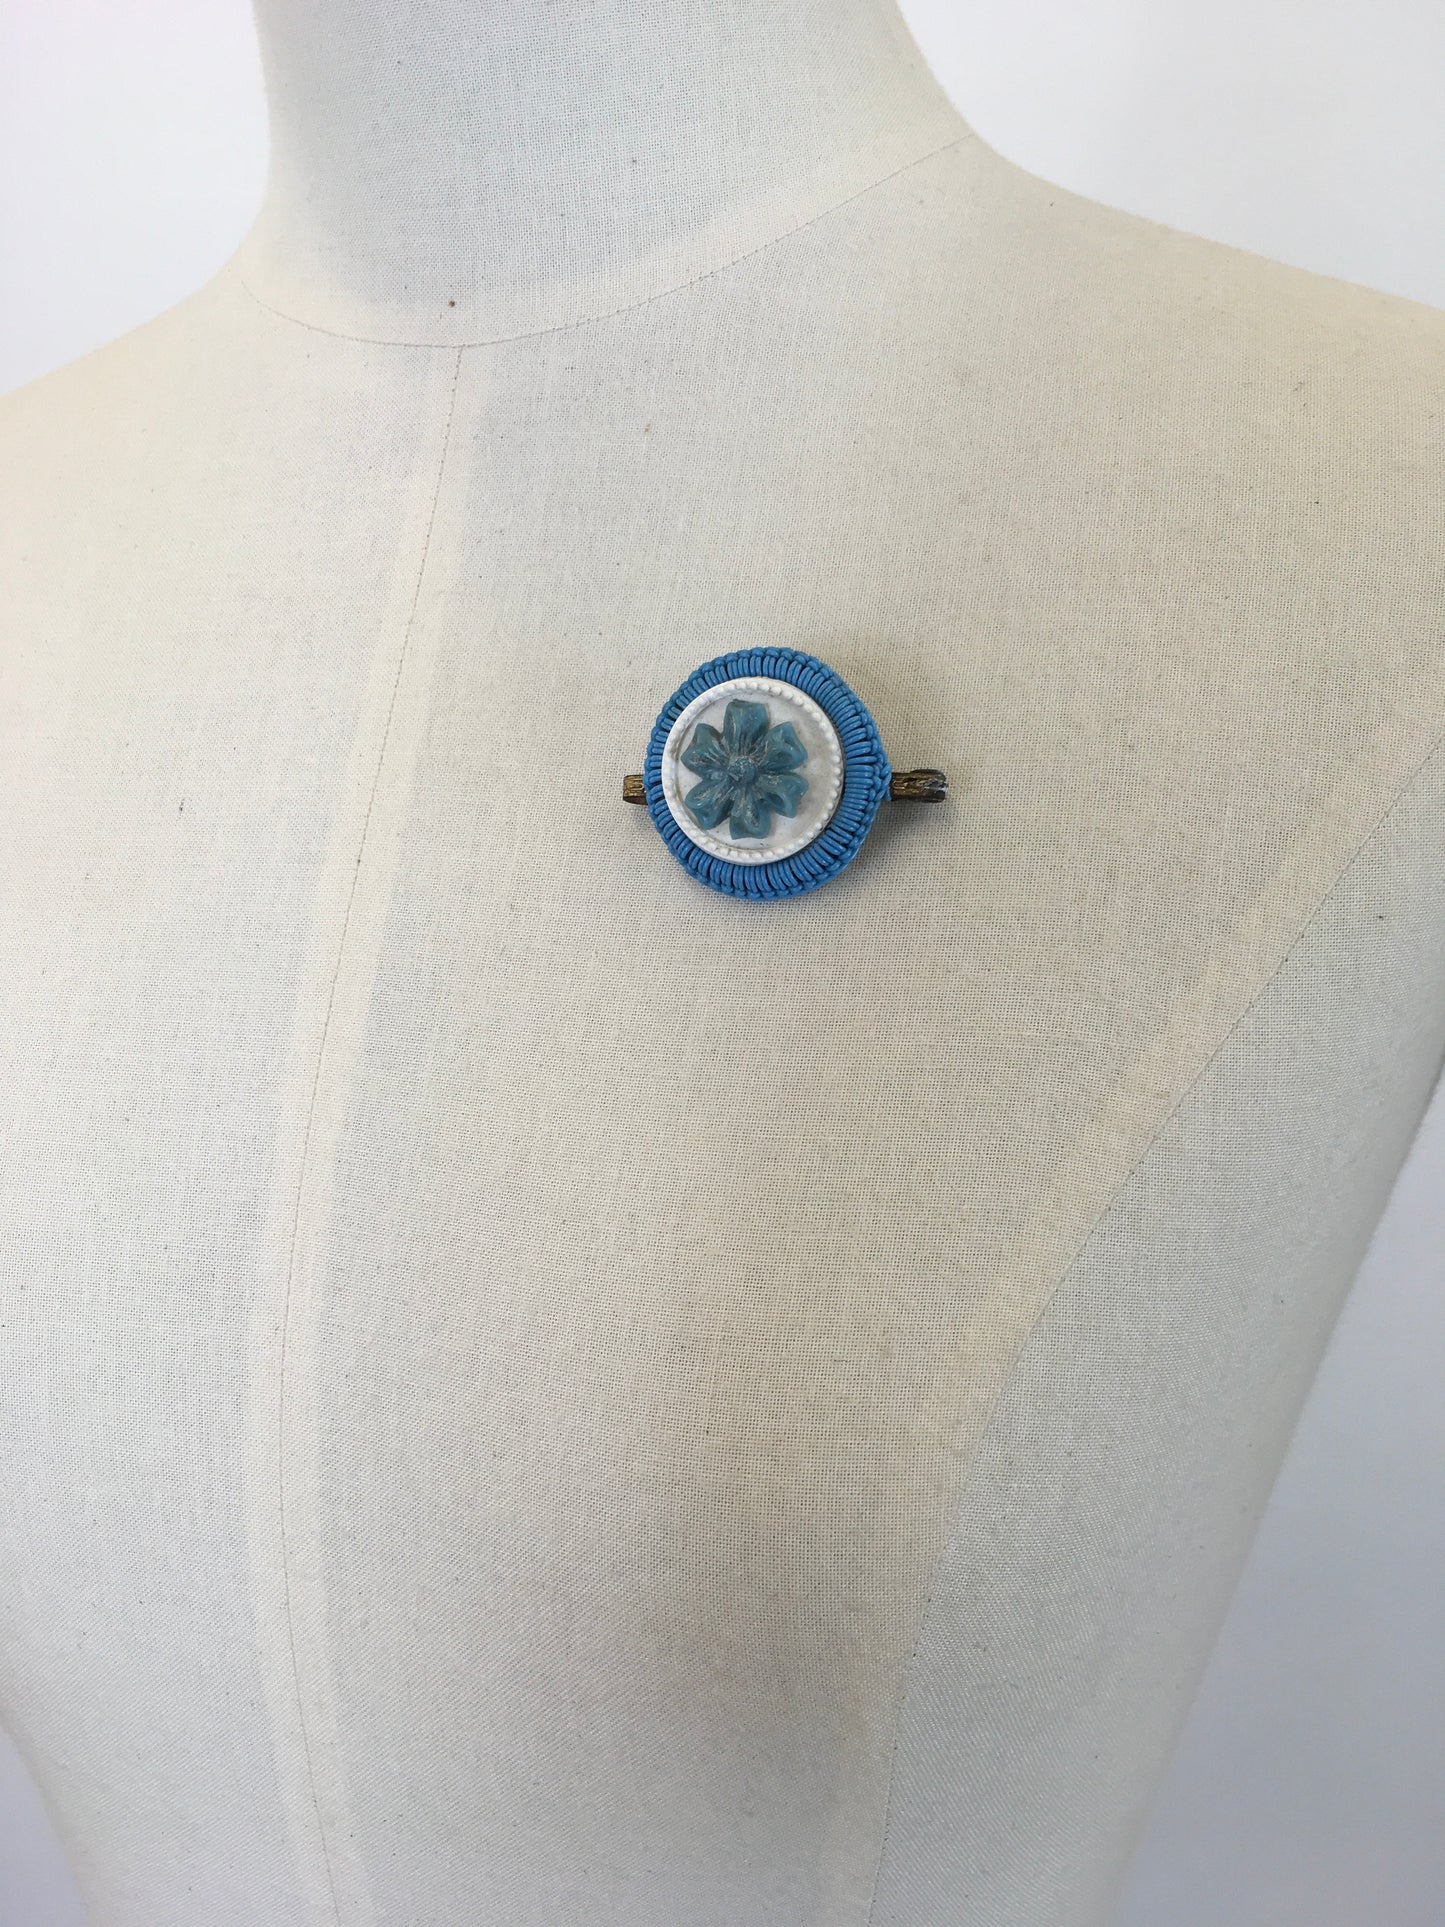 Original 1940's Make Do and Mend Telephone Wire Brooch - In A Timeless Blue & White